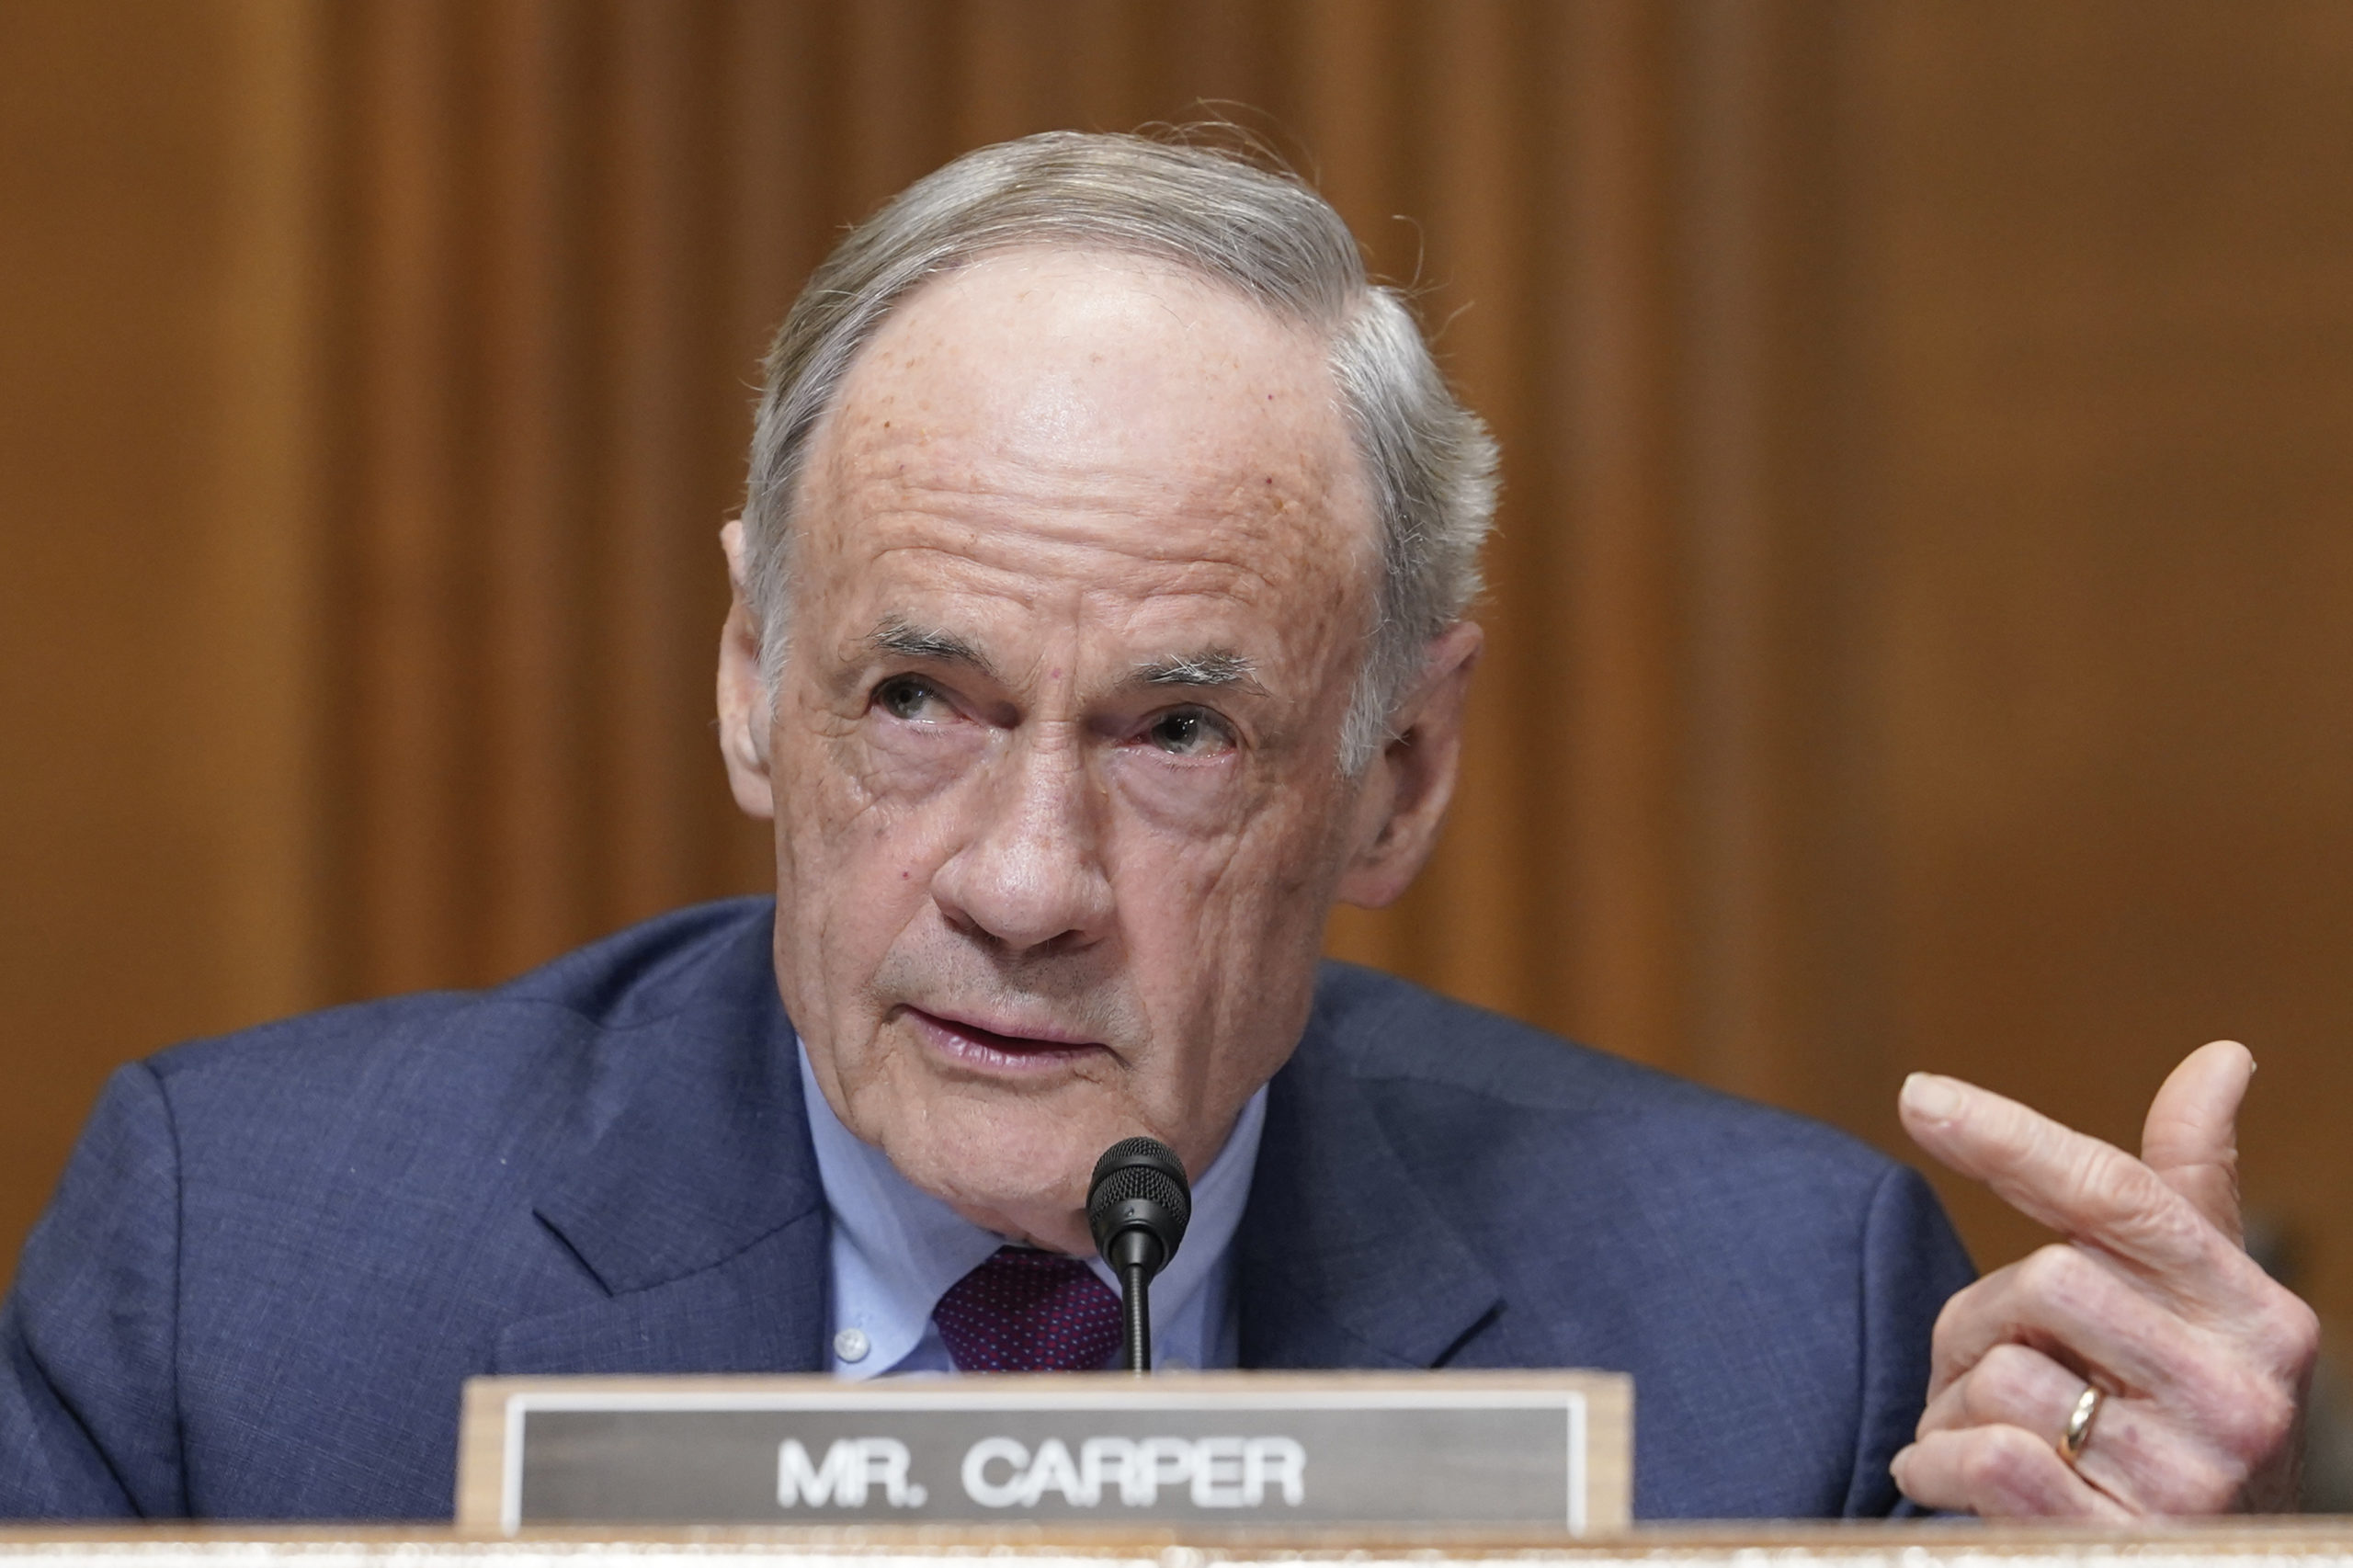 Sen. Tom Carper asks a question during the nomination of Daniel Werfel to be the Internal Revenue Service Commissioner on Capitol Hill in Washington, D.C., on Feb. 15.